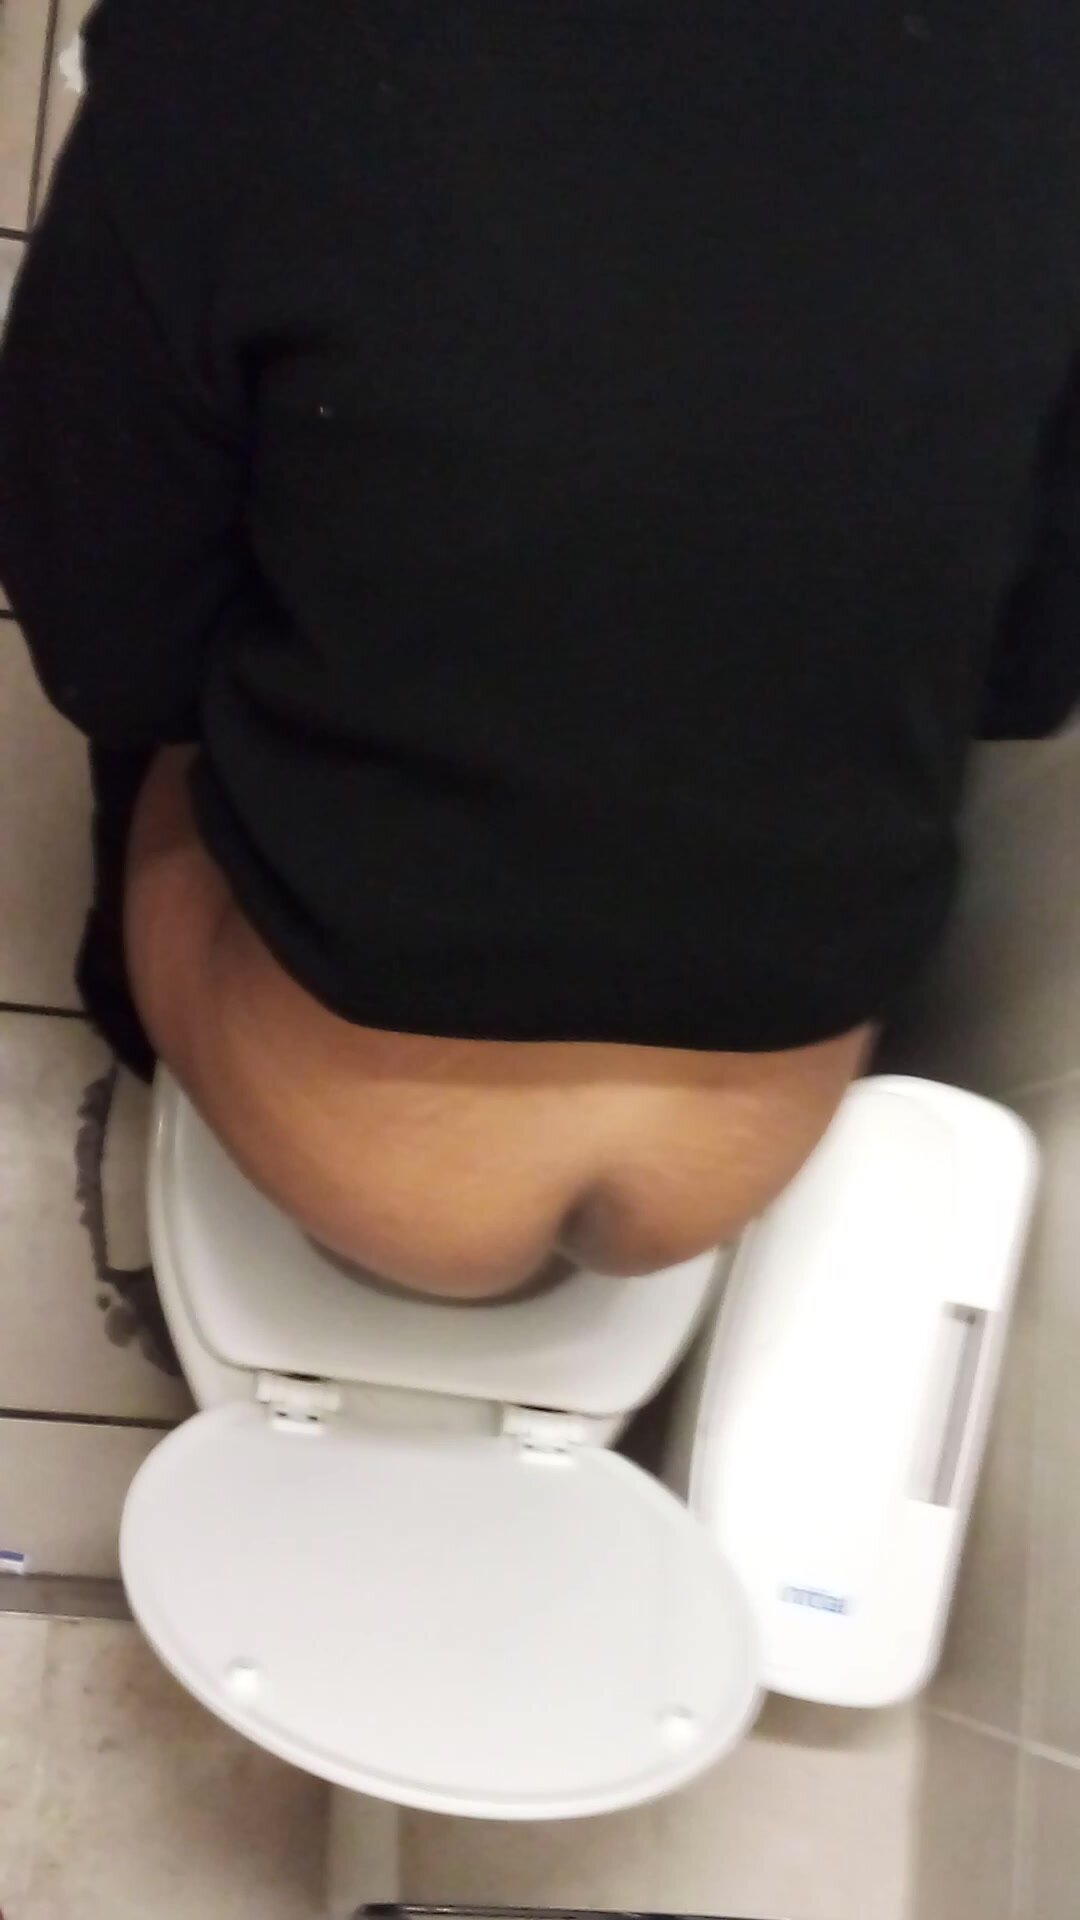 My colleague taking a piss in the toilet